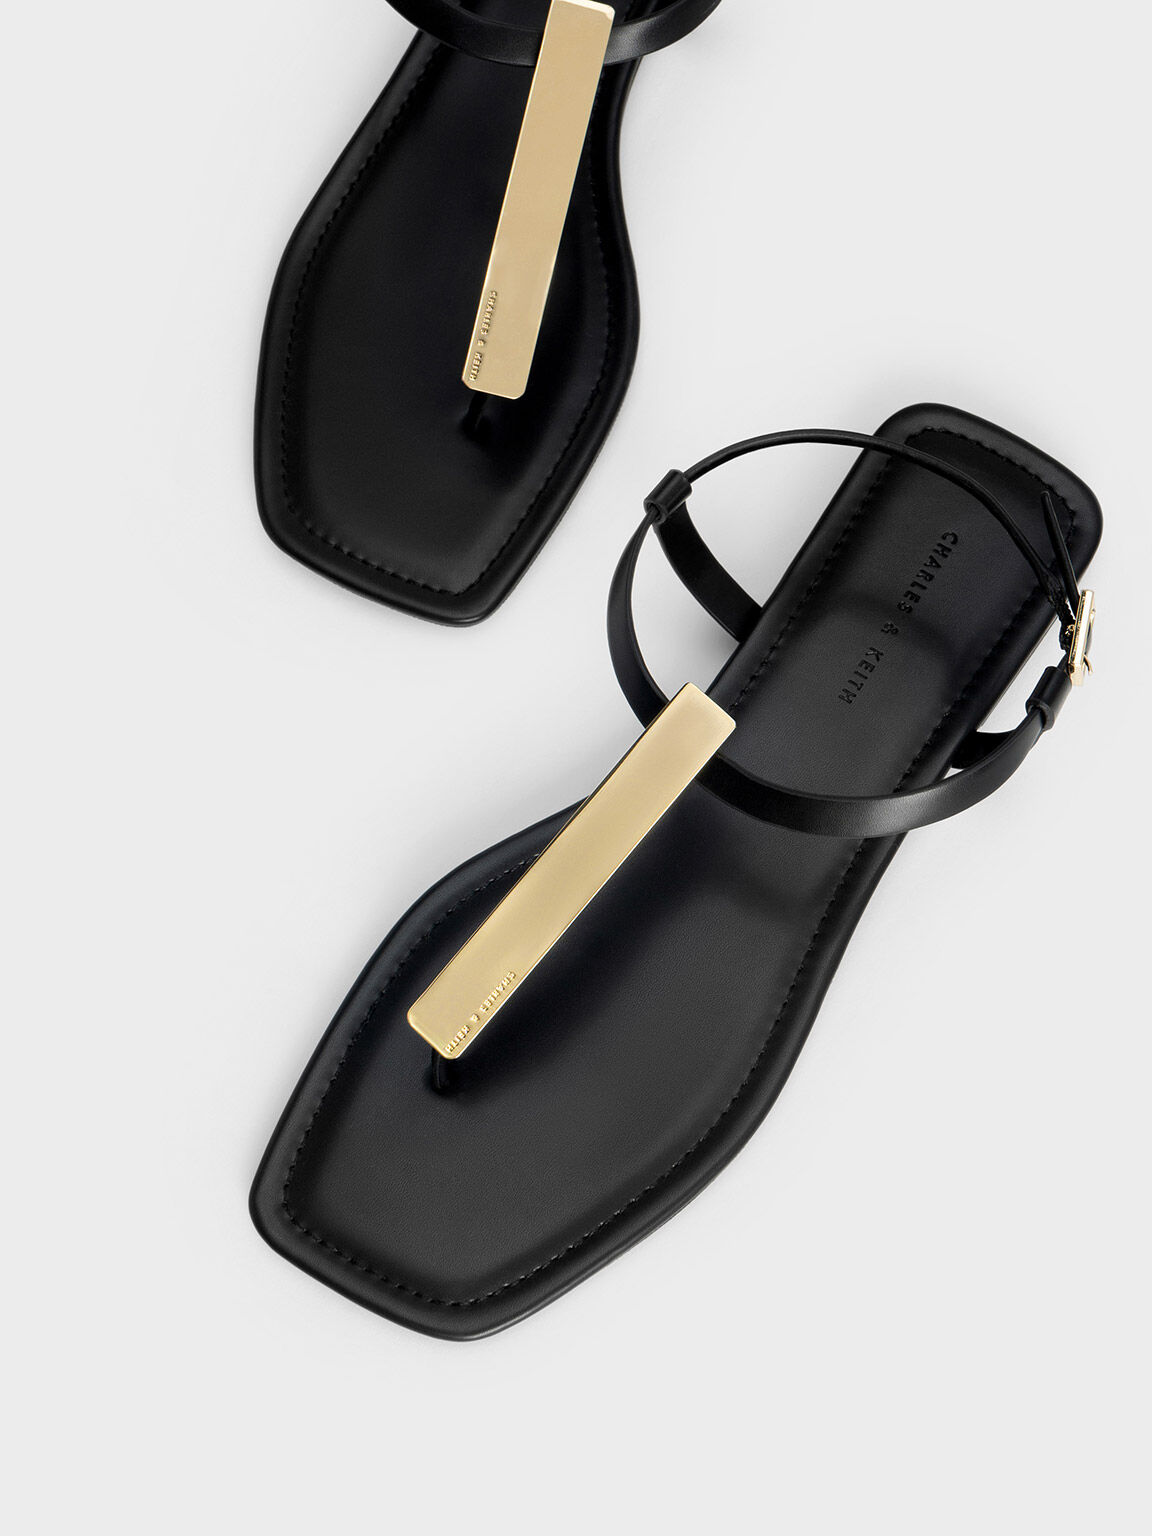 2 Strap Thong Sandal With Small Trim - Black